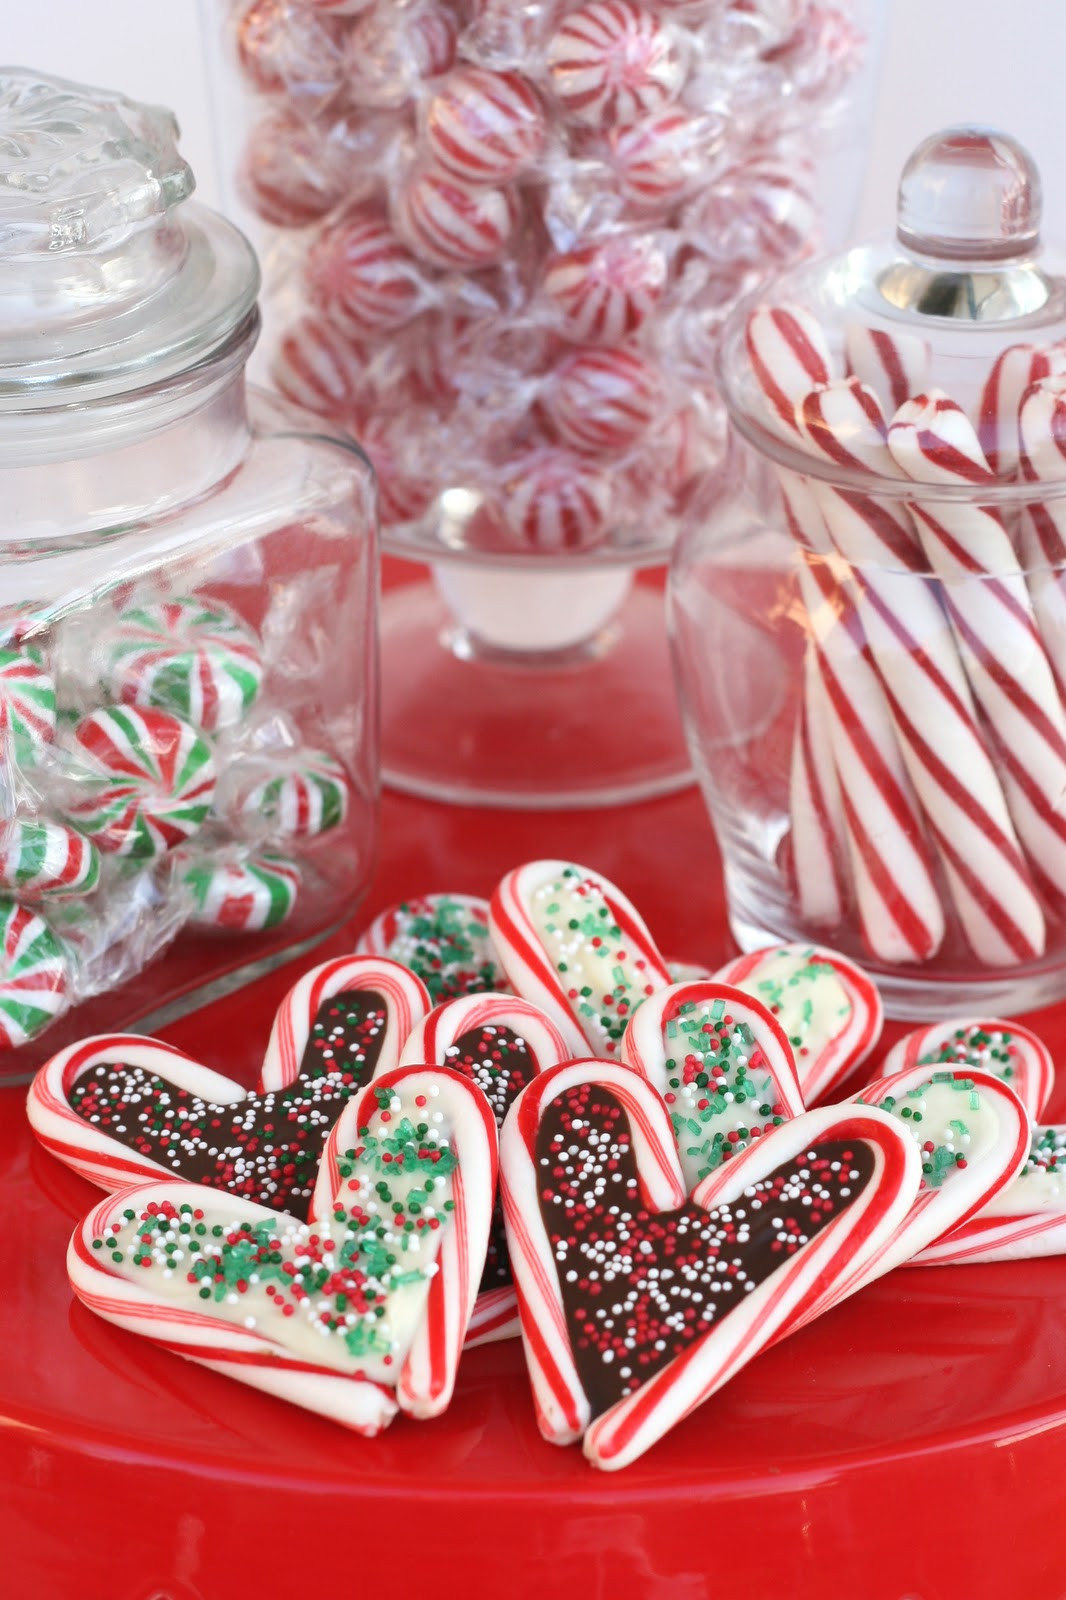 Christmas Candy Recipes For Gifts
 Candy Cane Hearts – Glorious Treats